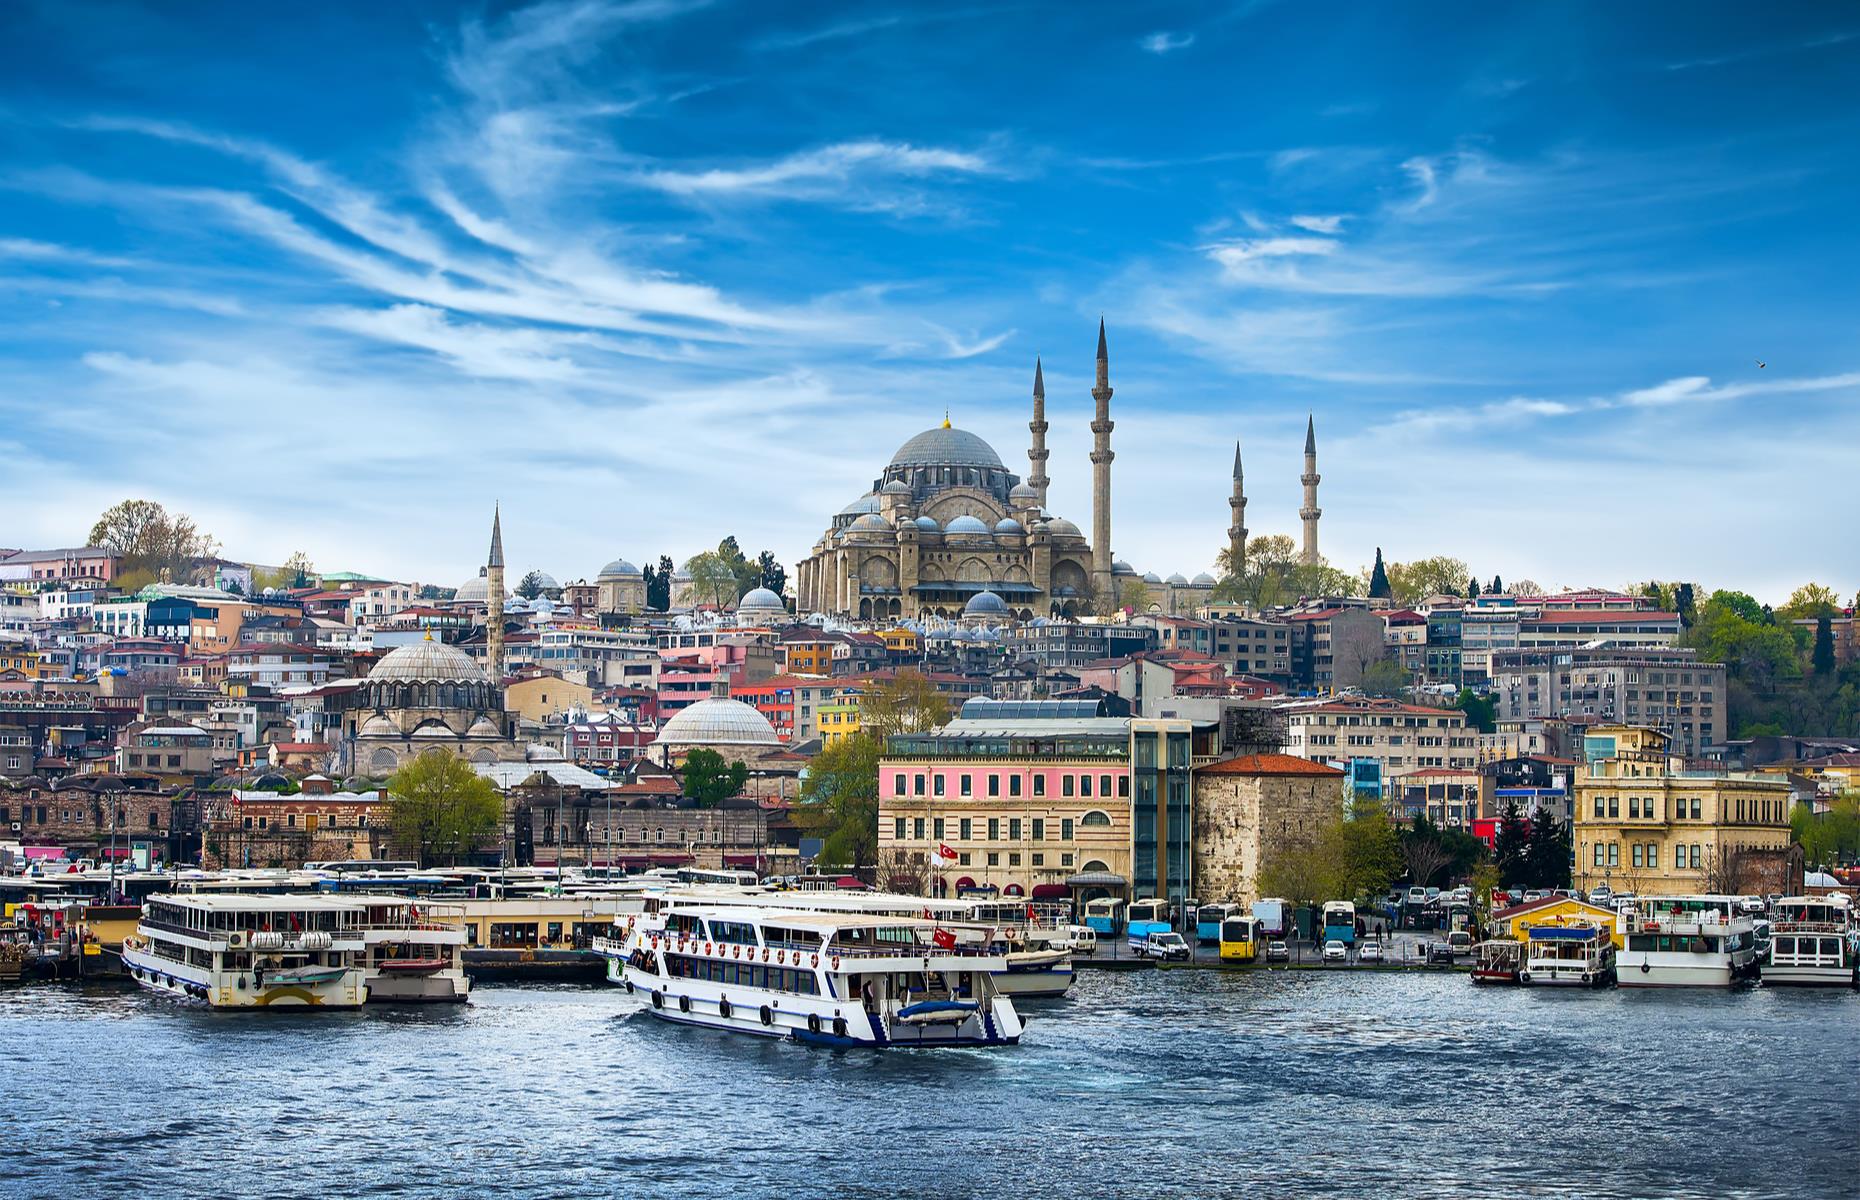 Set on the Bosphorus Straits, the east-meets-west metropolis stuns with its heady spice-scented bazaars, labyrinthine streets and awe-inspiring Ottoman-era architecture – the Blue Mosque, the Hagia Sophia and the Topkapi Palace are its big hitters. A cruise out on the Bosphorus is another city essential, as is time spent exploring its treasure-stuffed museums: set aside plenty of hours to marvel at the riches within the Istanbul Archaeology Museums and the Turkish and Islamic Arts Museum.